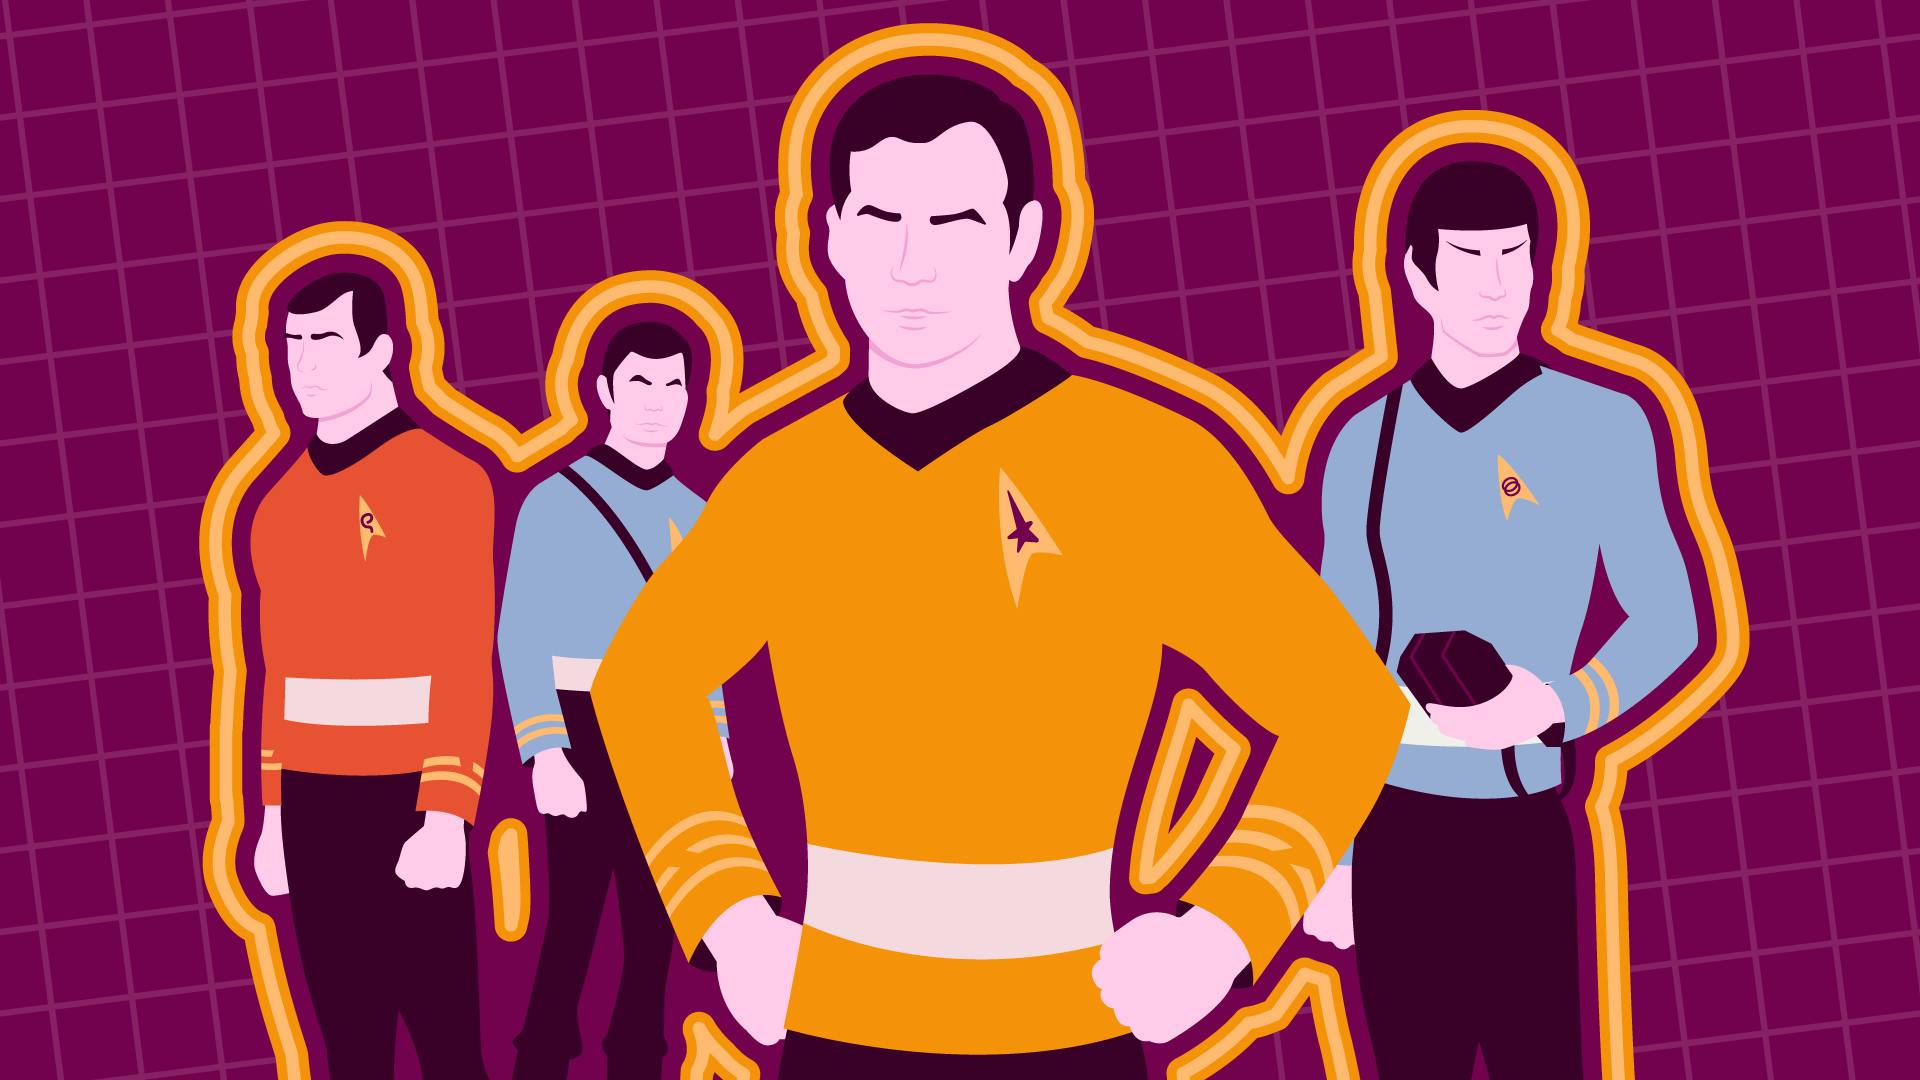 Graphic illustration of Captain Kirk with his fists on his hips and Scotty, McCoy, and Spock holding his tricorder behind him